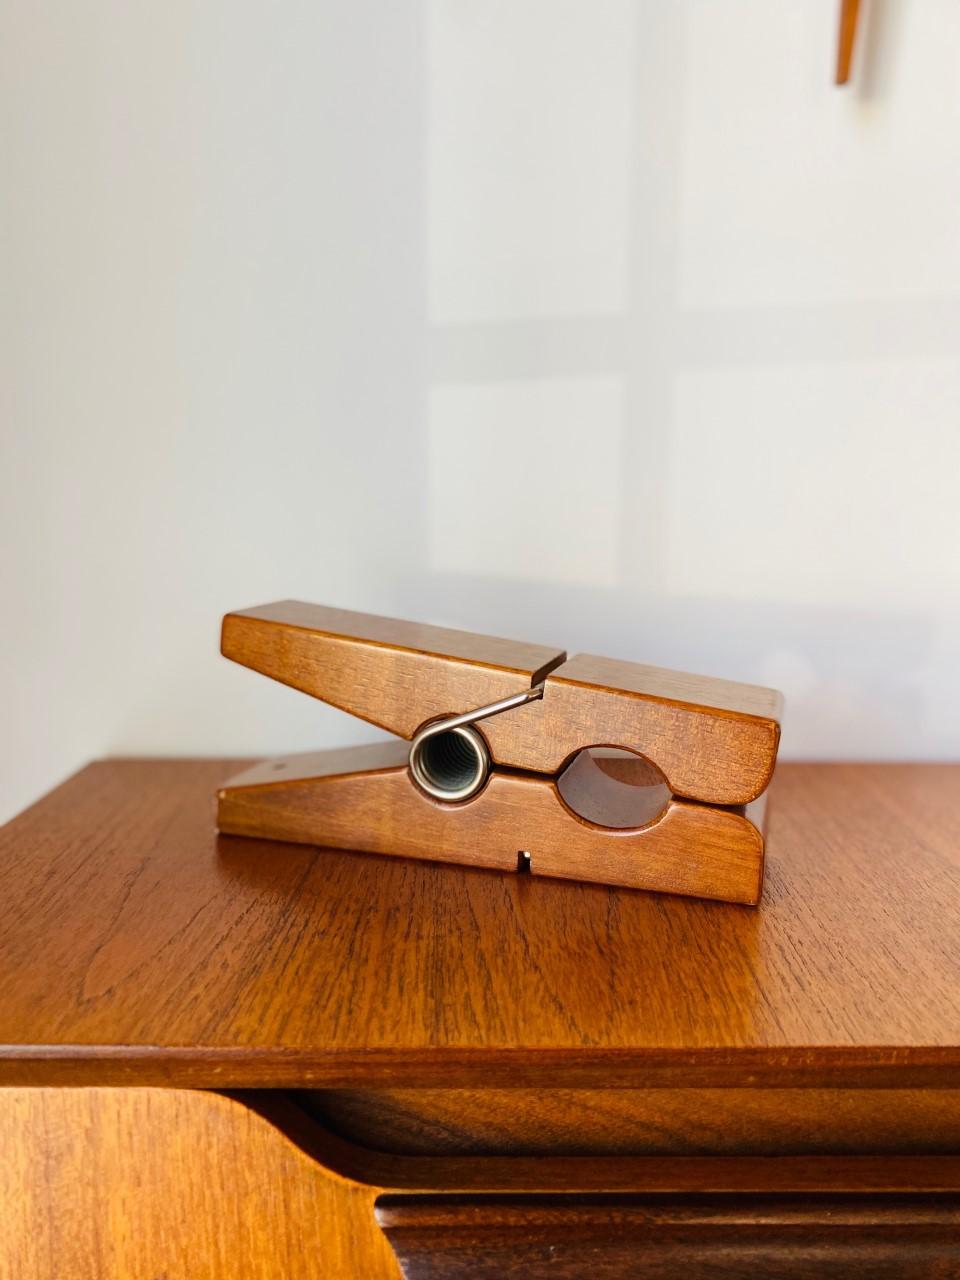 Beautifully crafted large scale teak wood clothespin figure (works like a clothespin) that adds Midcentury style to your decor. This piece will make a statement in your decor wherever it is placed.